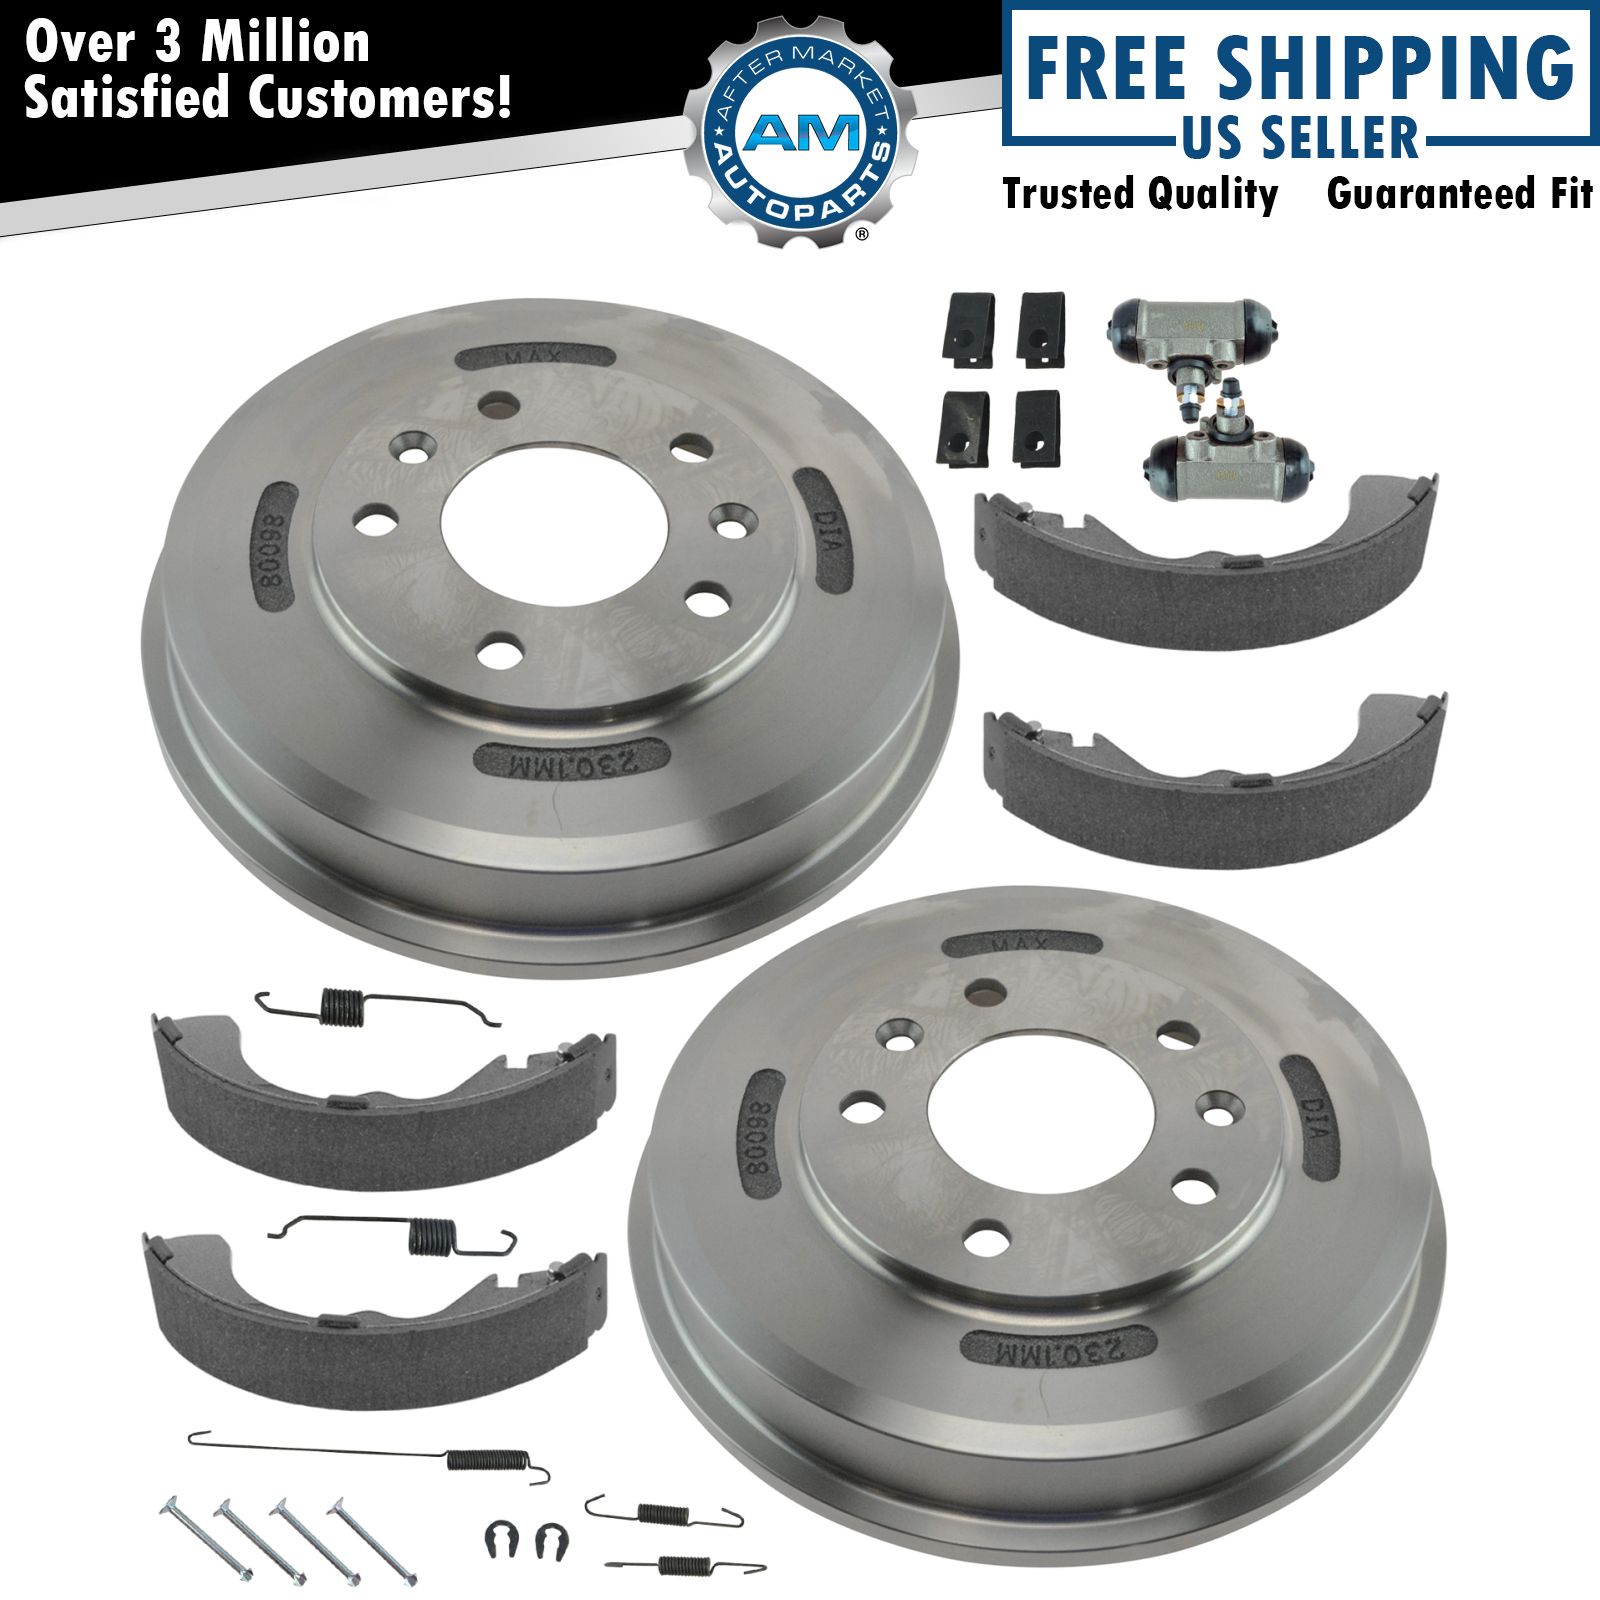 Rear Brake Drum & Shoe Kit with Hardware & Wheel Cylinders for Ford SUV Truck